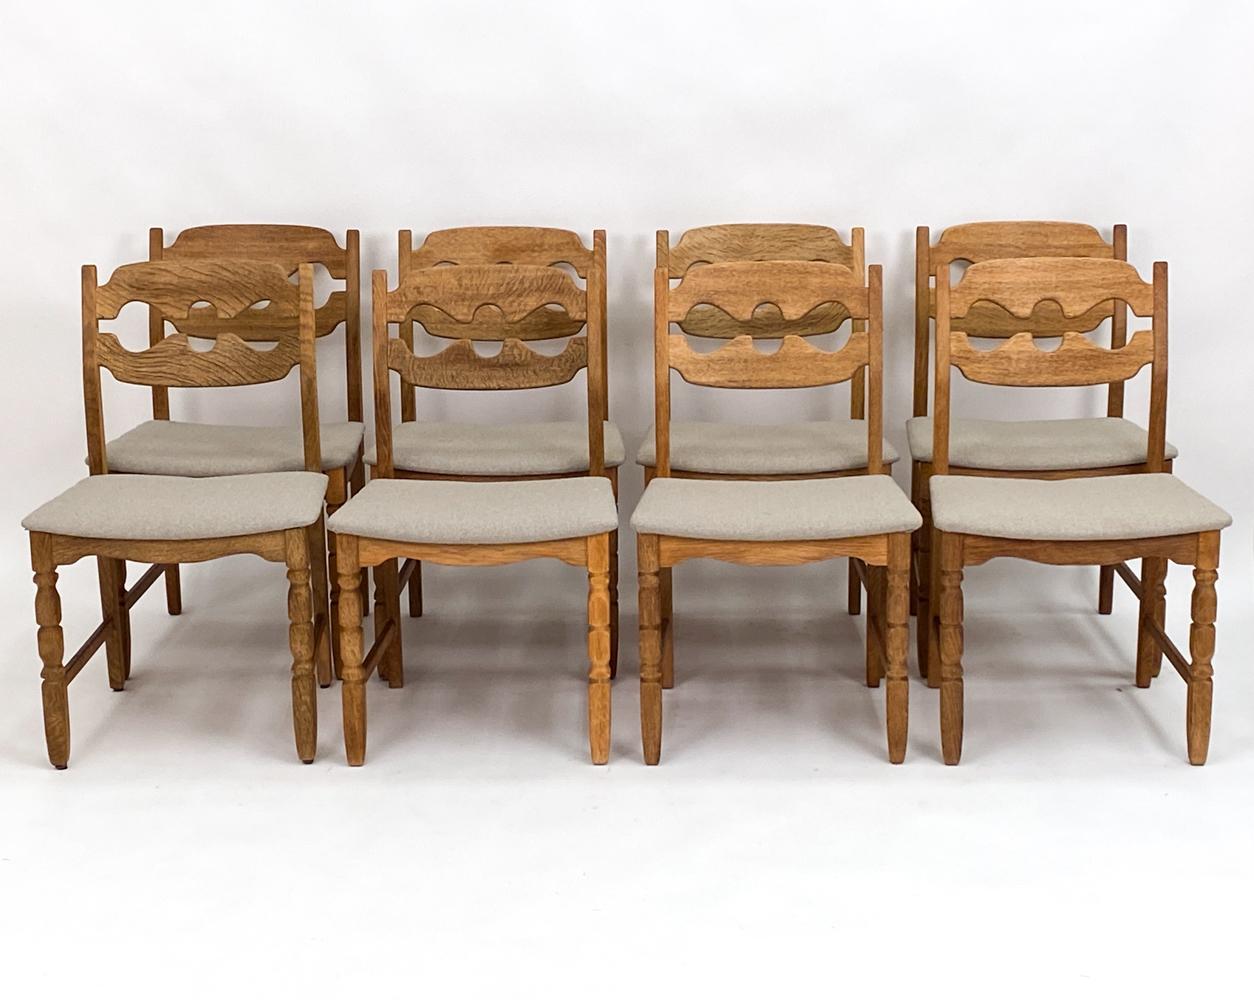 Elevate your dining experience to unparalleled heights with this exquisite set of eight 